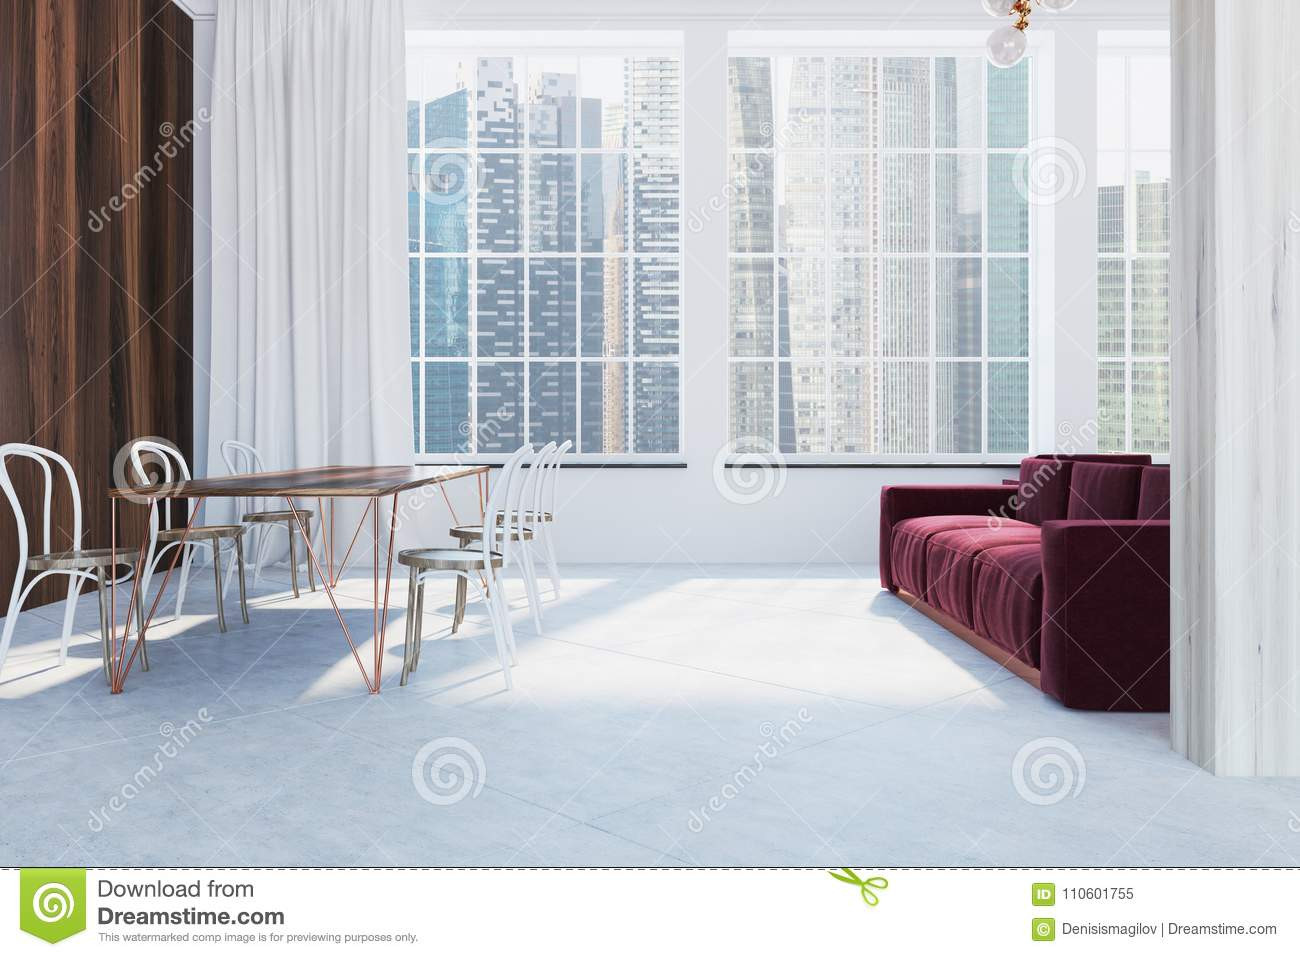 16 Lovely Dark Hardwood Floor Living Room Ideas 2024 free download dark hardwood floor living room ideas of scandinavian style living room red sofa side stock illustration with panoramic white dining room with a long dark wooden table white and wooden chair